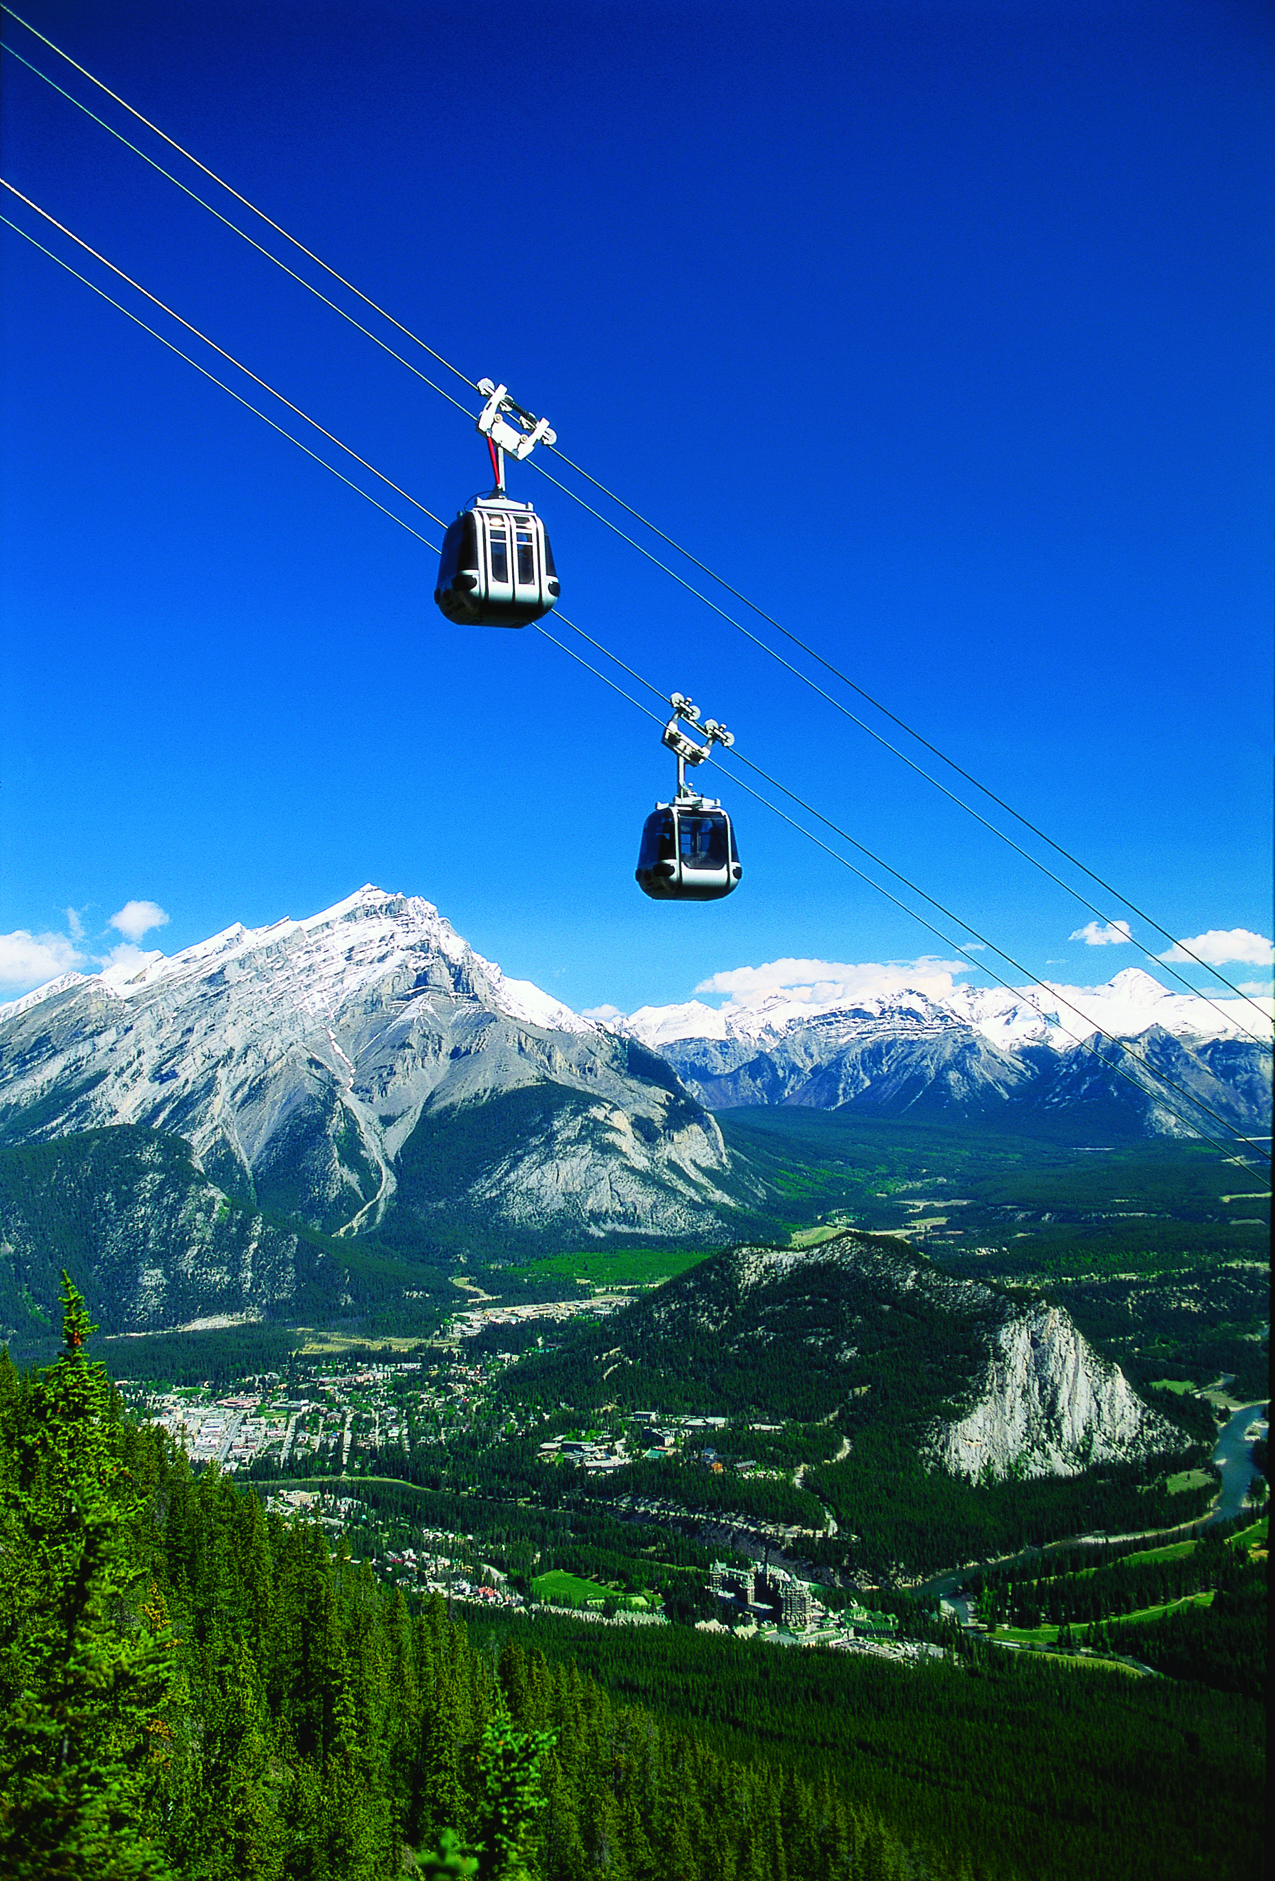 Enjoy stunning views of Mount Rundle and the Bow Valley as the Banff Gondola carries you to a mountaintop 2,900 feet above Banff. Photo courtesy Brewster Tours.